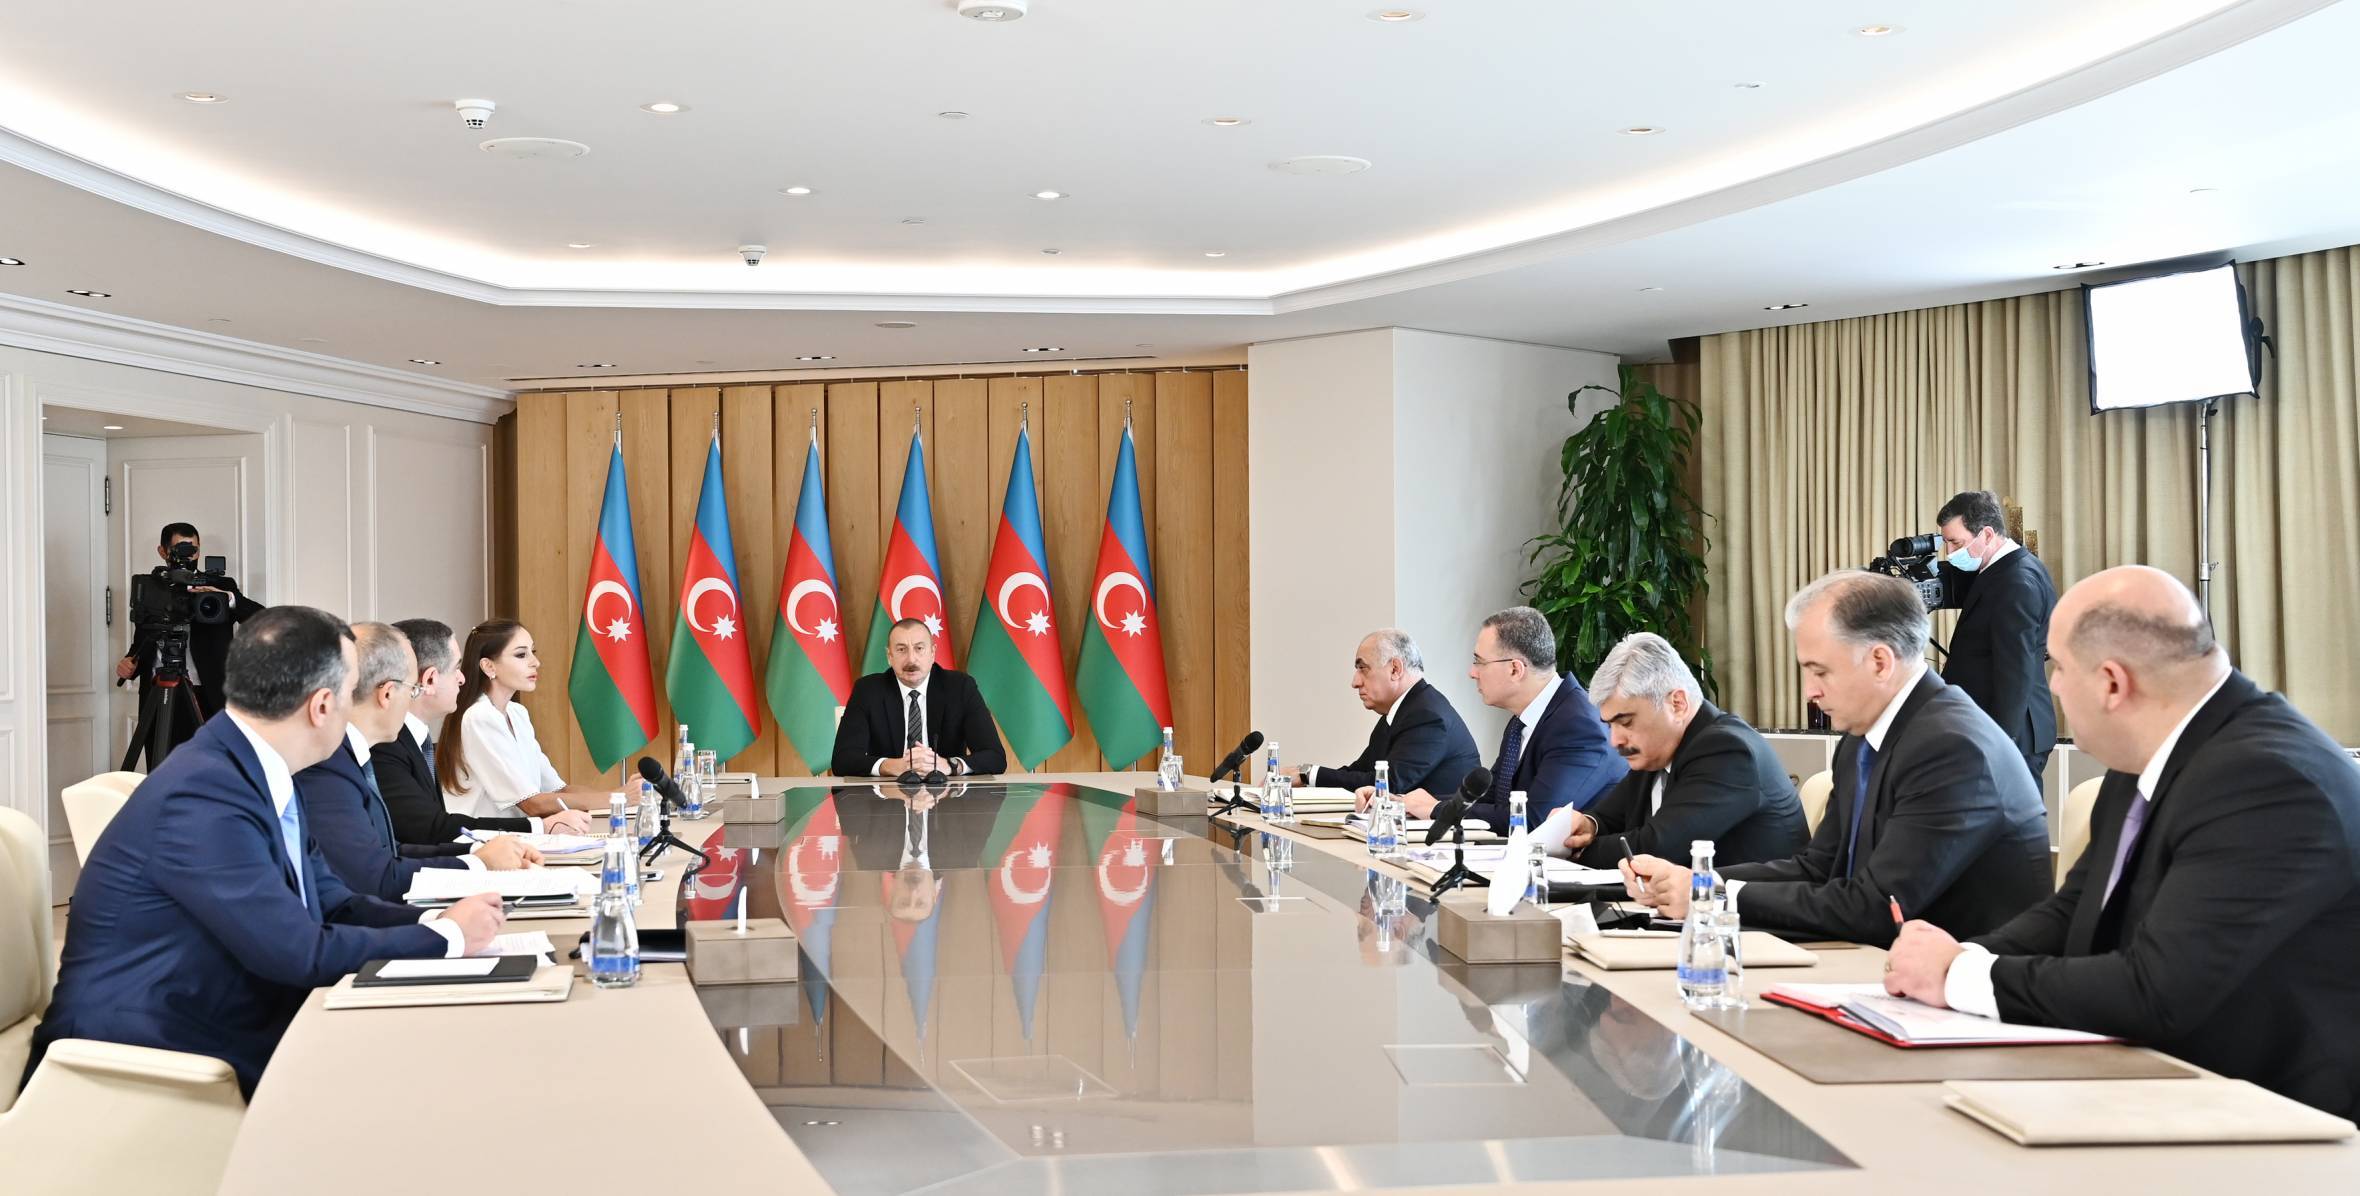 Opening and closing remarks by Ilham Aliyev at the meeting on the results of the first quarter of 2022